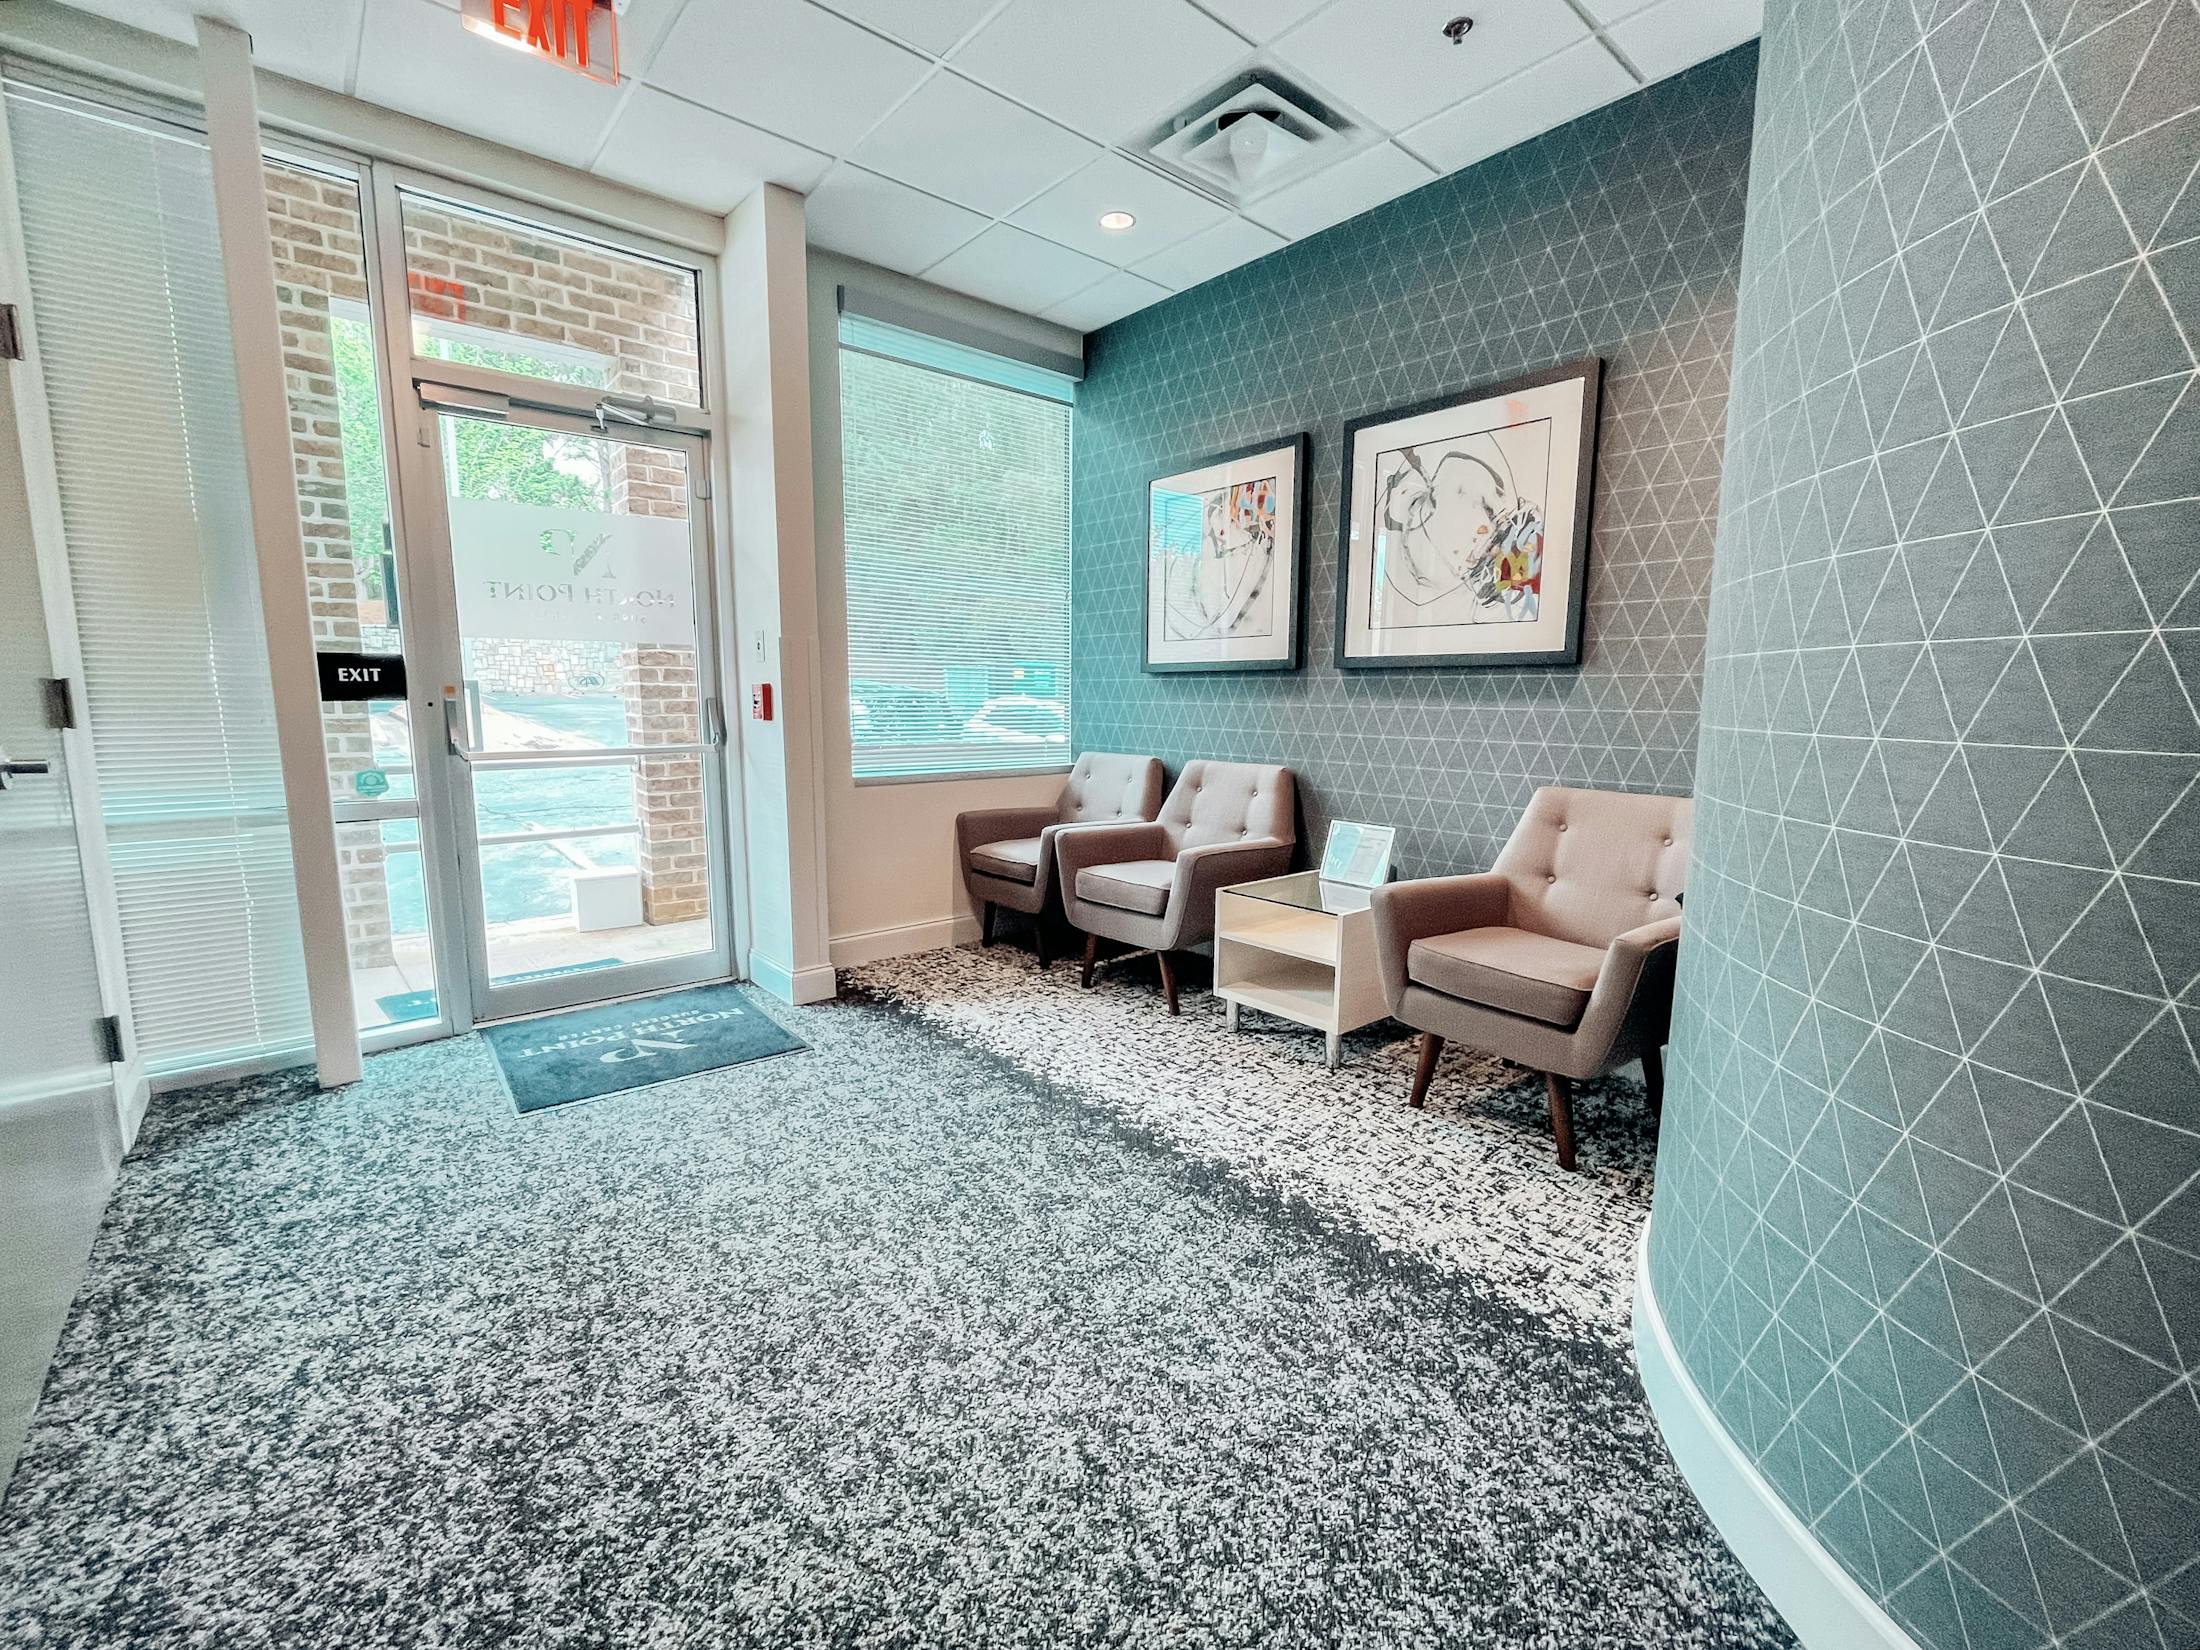 An image of the lobby at Robb Facial Plastic Surgery & Aesthetics